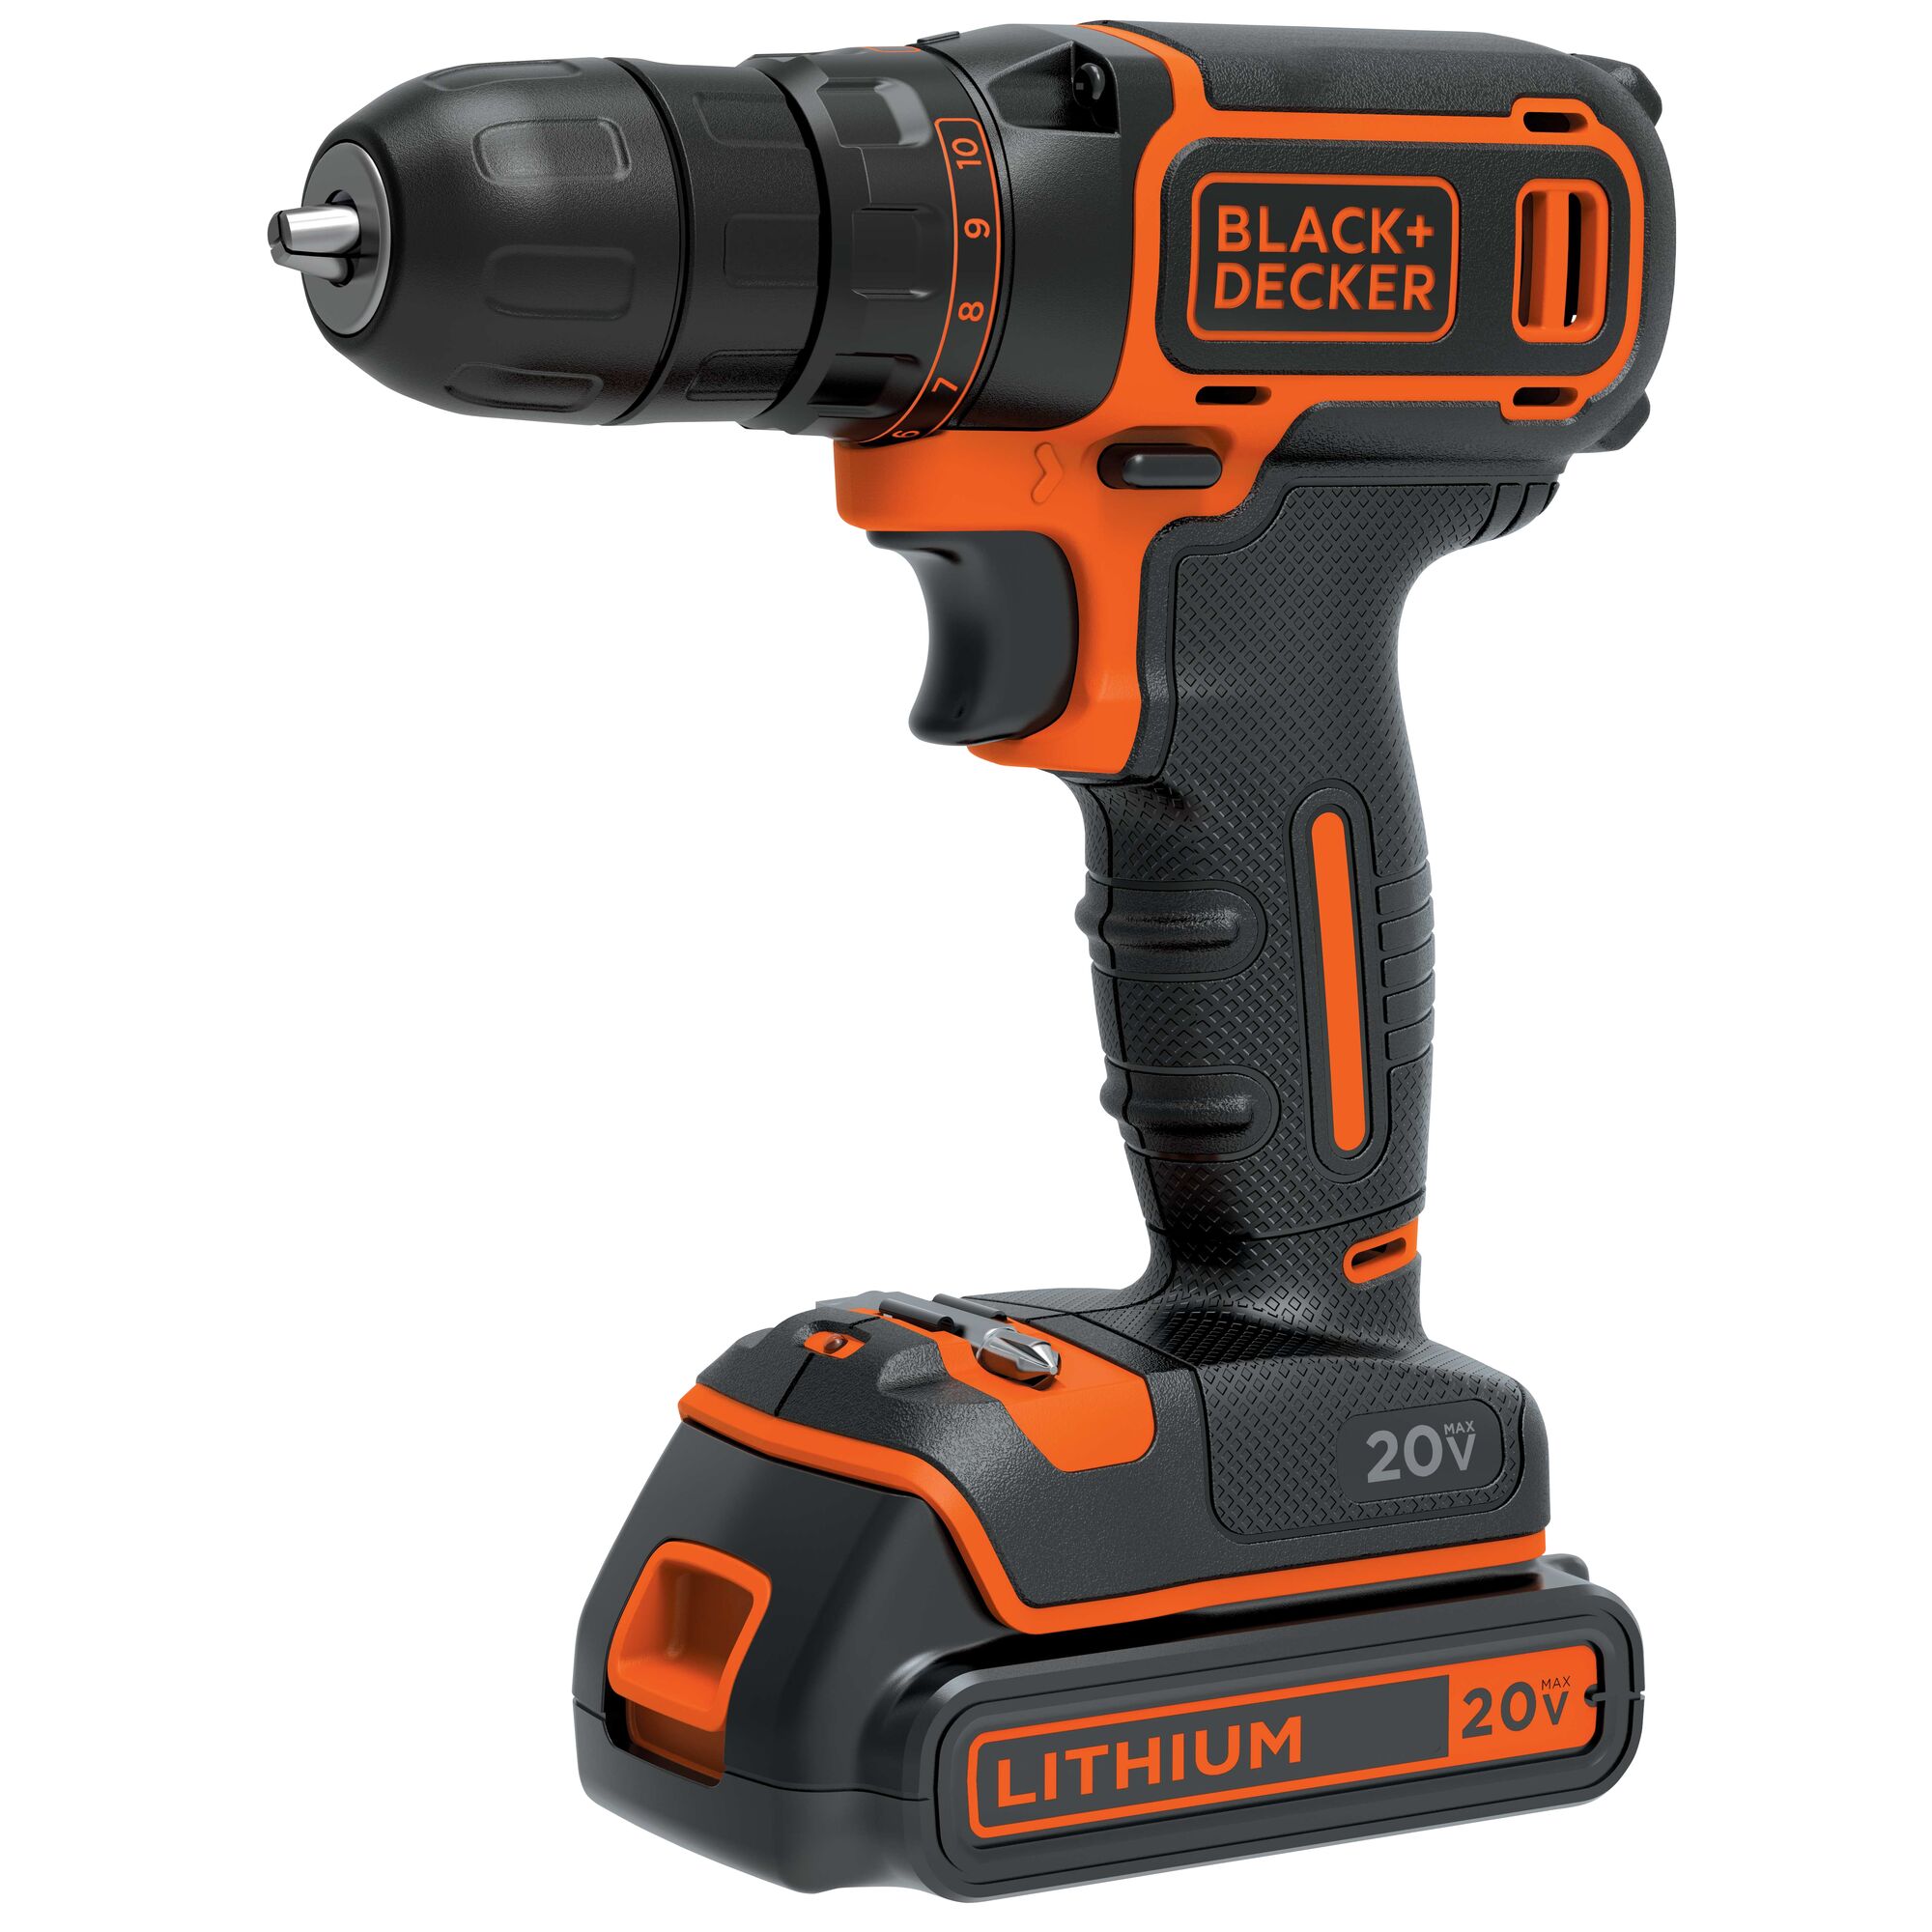 Black and Decker Lithium Drill and Driver.